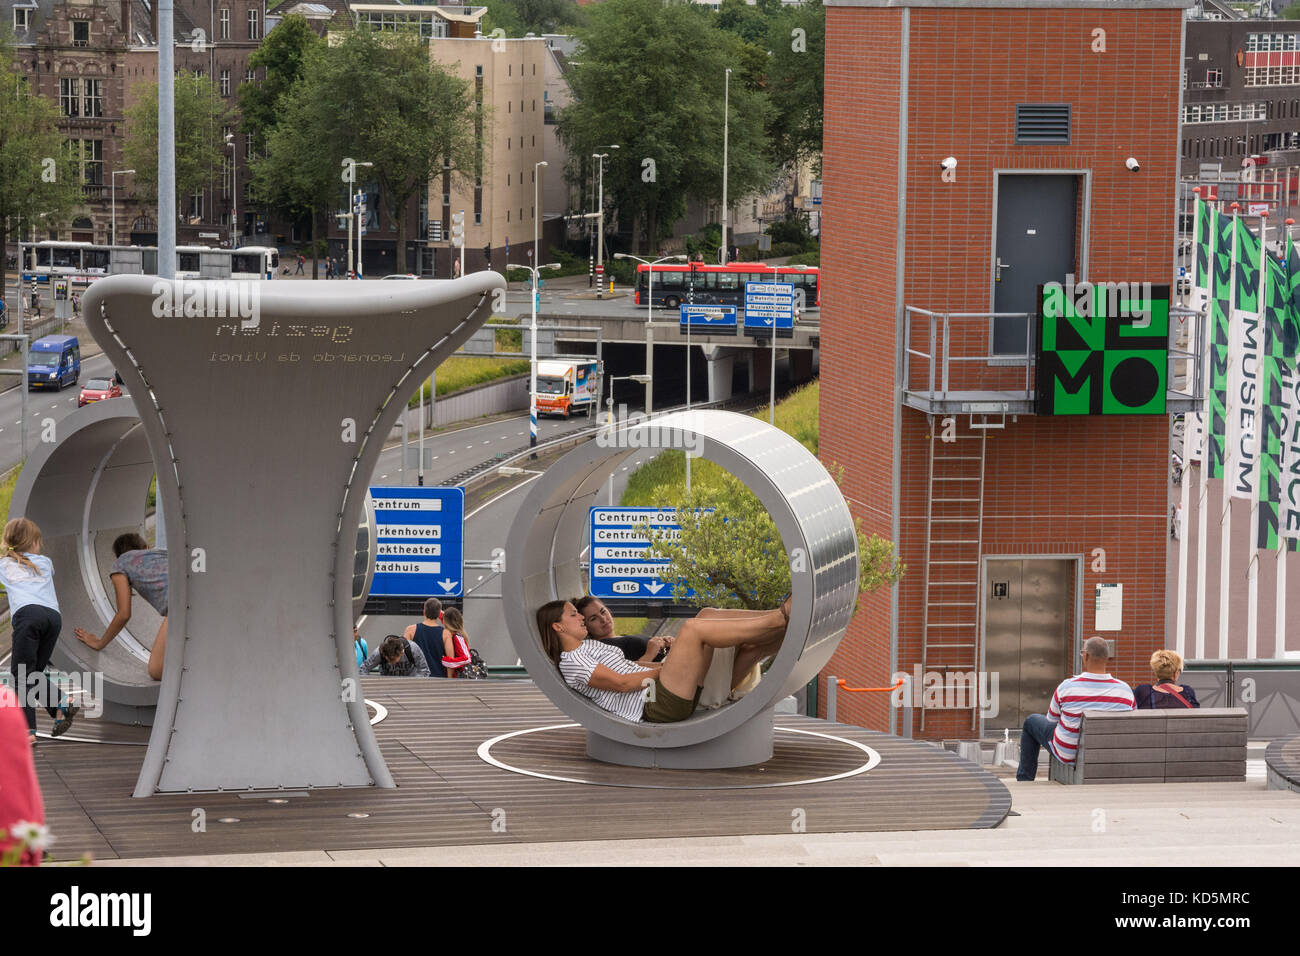 The view from the roof of NEMO, Amsterdam's Science Museum. Two young women sit inside interactive 'Solar Island' seating. Stock Photo